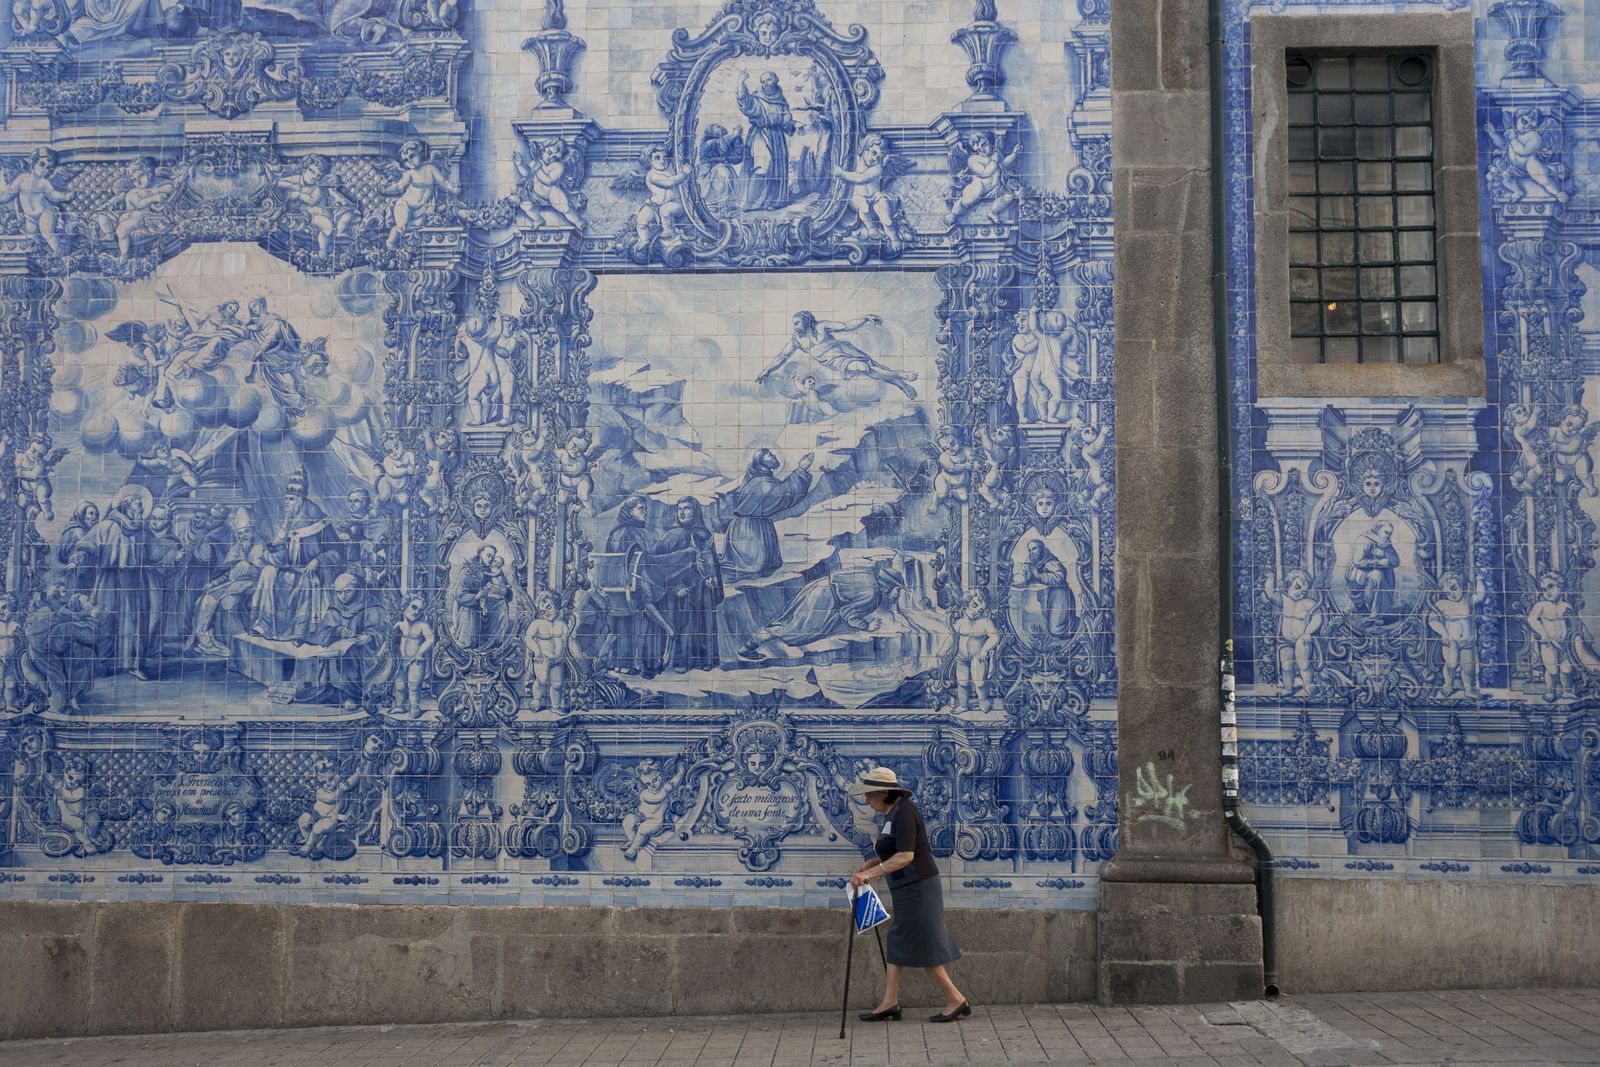 To Get to Know Portugal, Explore Its Azulejo Tilework